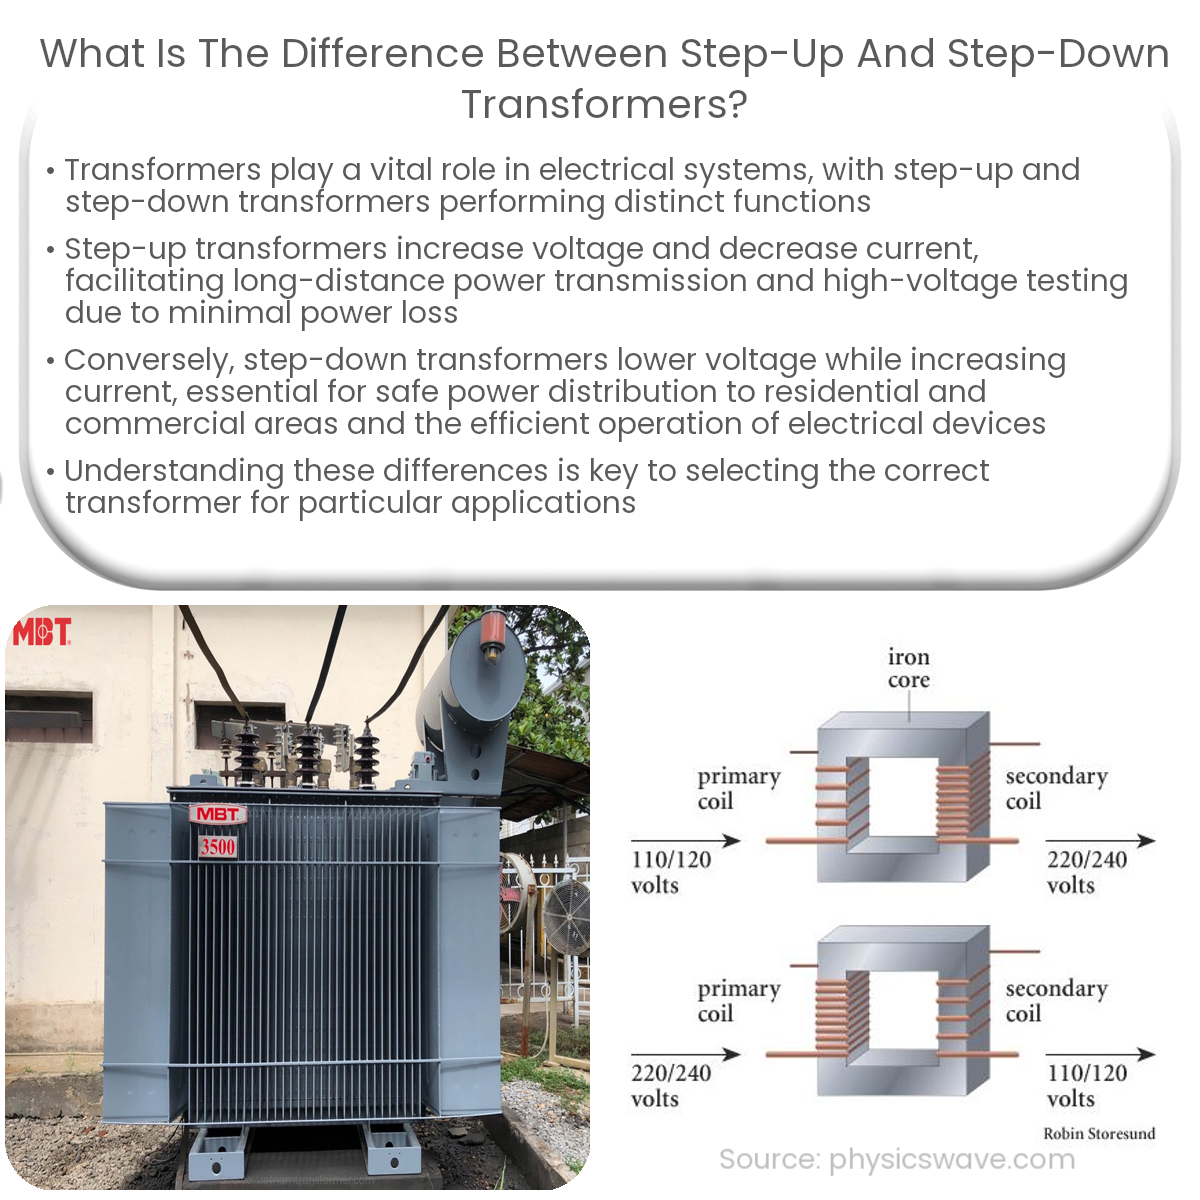 What is the difference between step-up and step-down transformers?